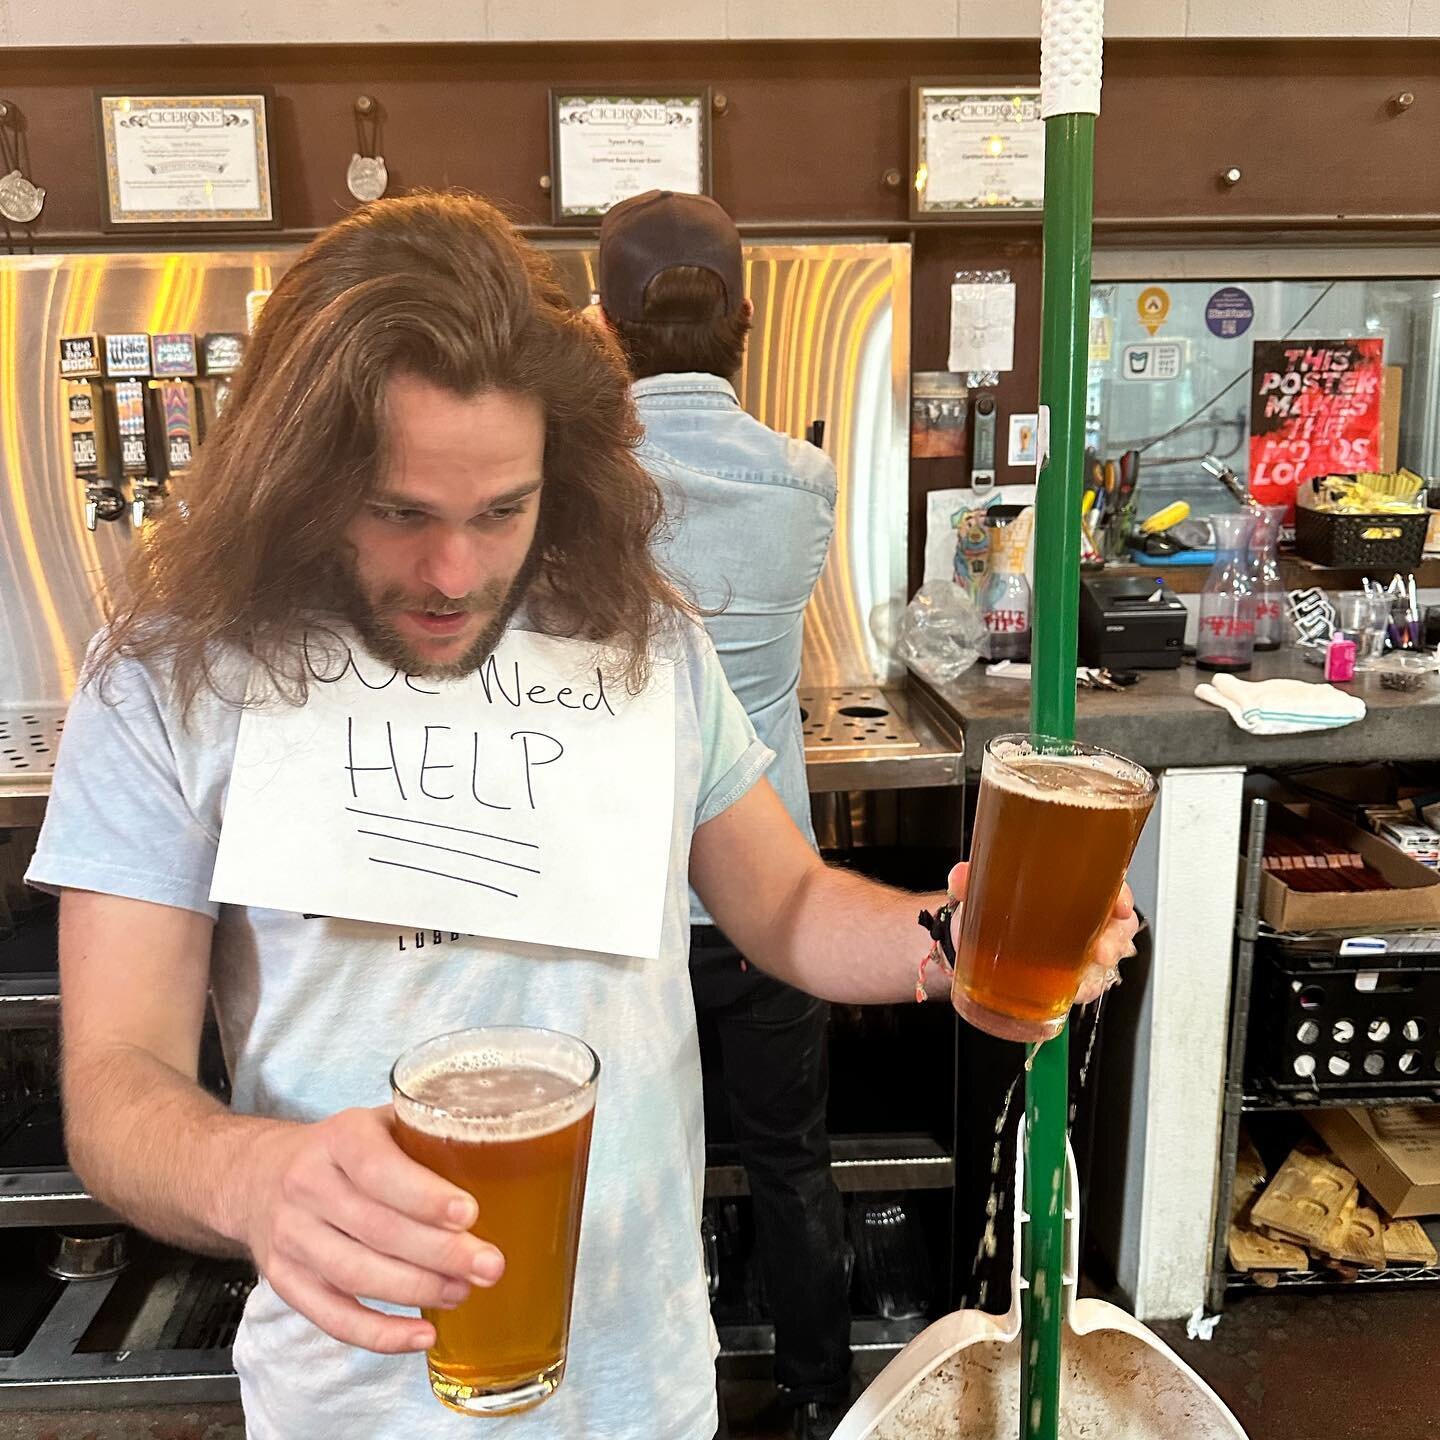 We are looking to hire beer tenders! Will needs help and apparently having him work 12 hours a day isn&rsquo;t &ldquo;acceptable&rdquo;. If You&rsquo;re a cool person and want to hang out with other cool people, send a resume to management@twodocsbre